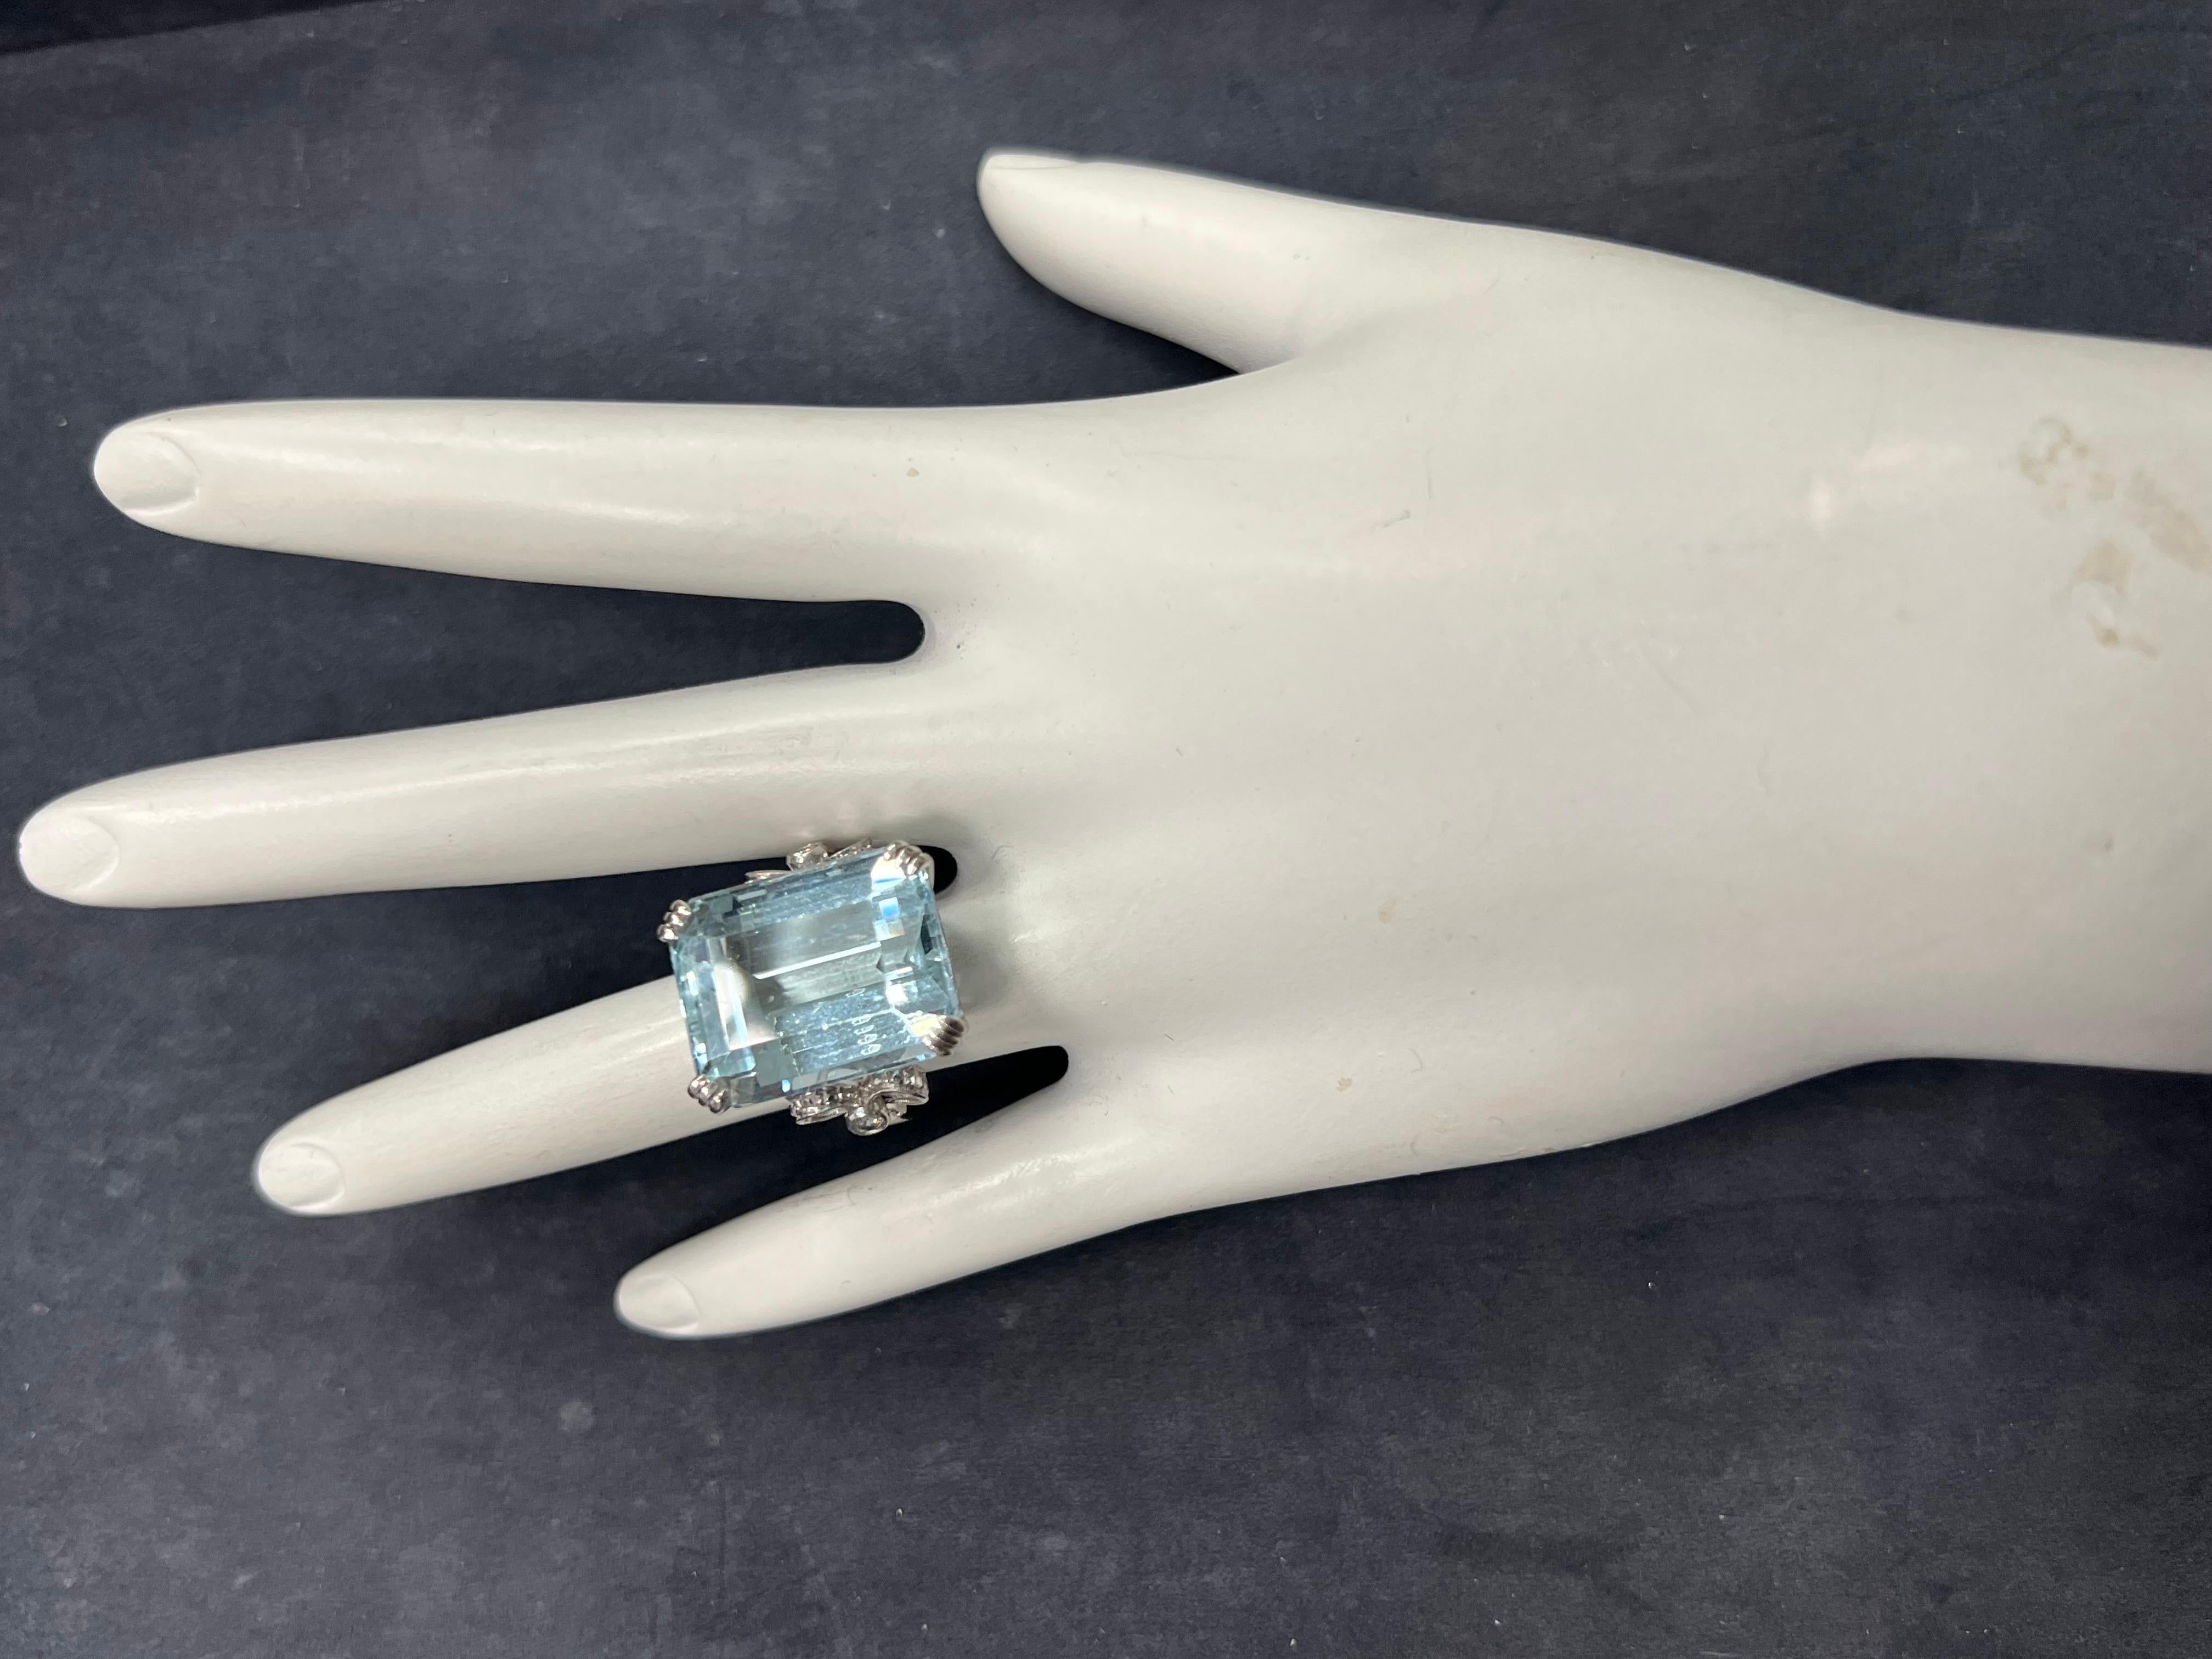 A magnificent 18K White Gold Aquamarine and Diamond Ring.

The centerstone is an approximately 20 carat emerald cut natural aquamarine measuring 18.53x14.74x10.67mm. The stone has slight abrasions. 

The ring is set with two round brilliant natural